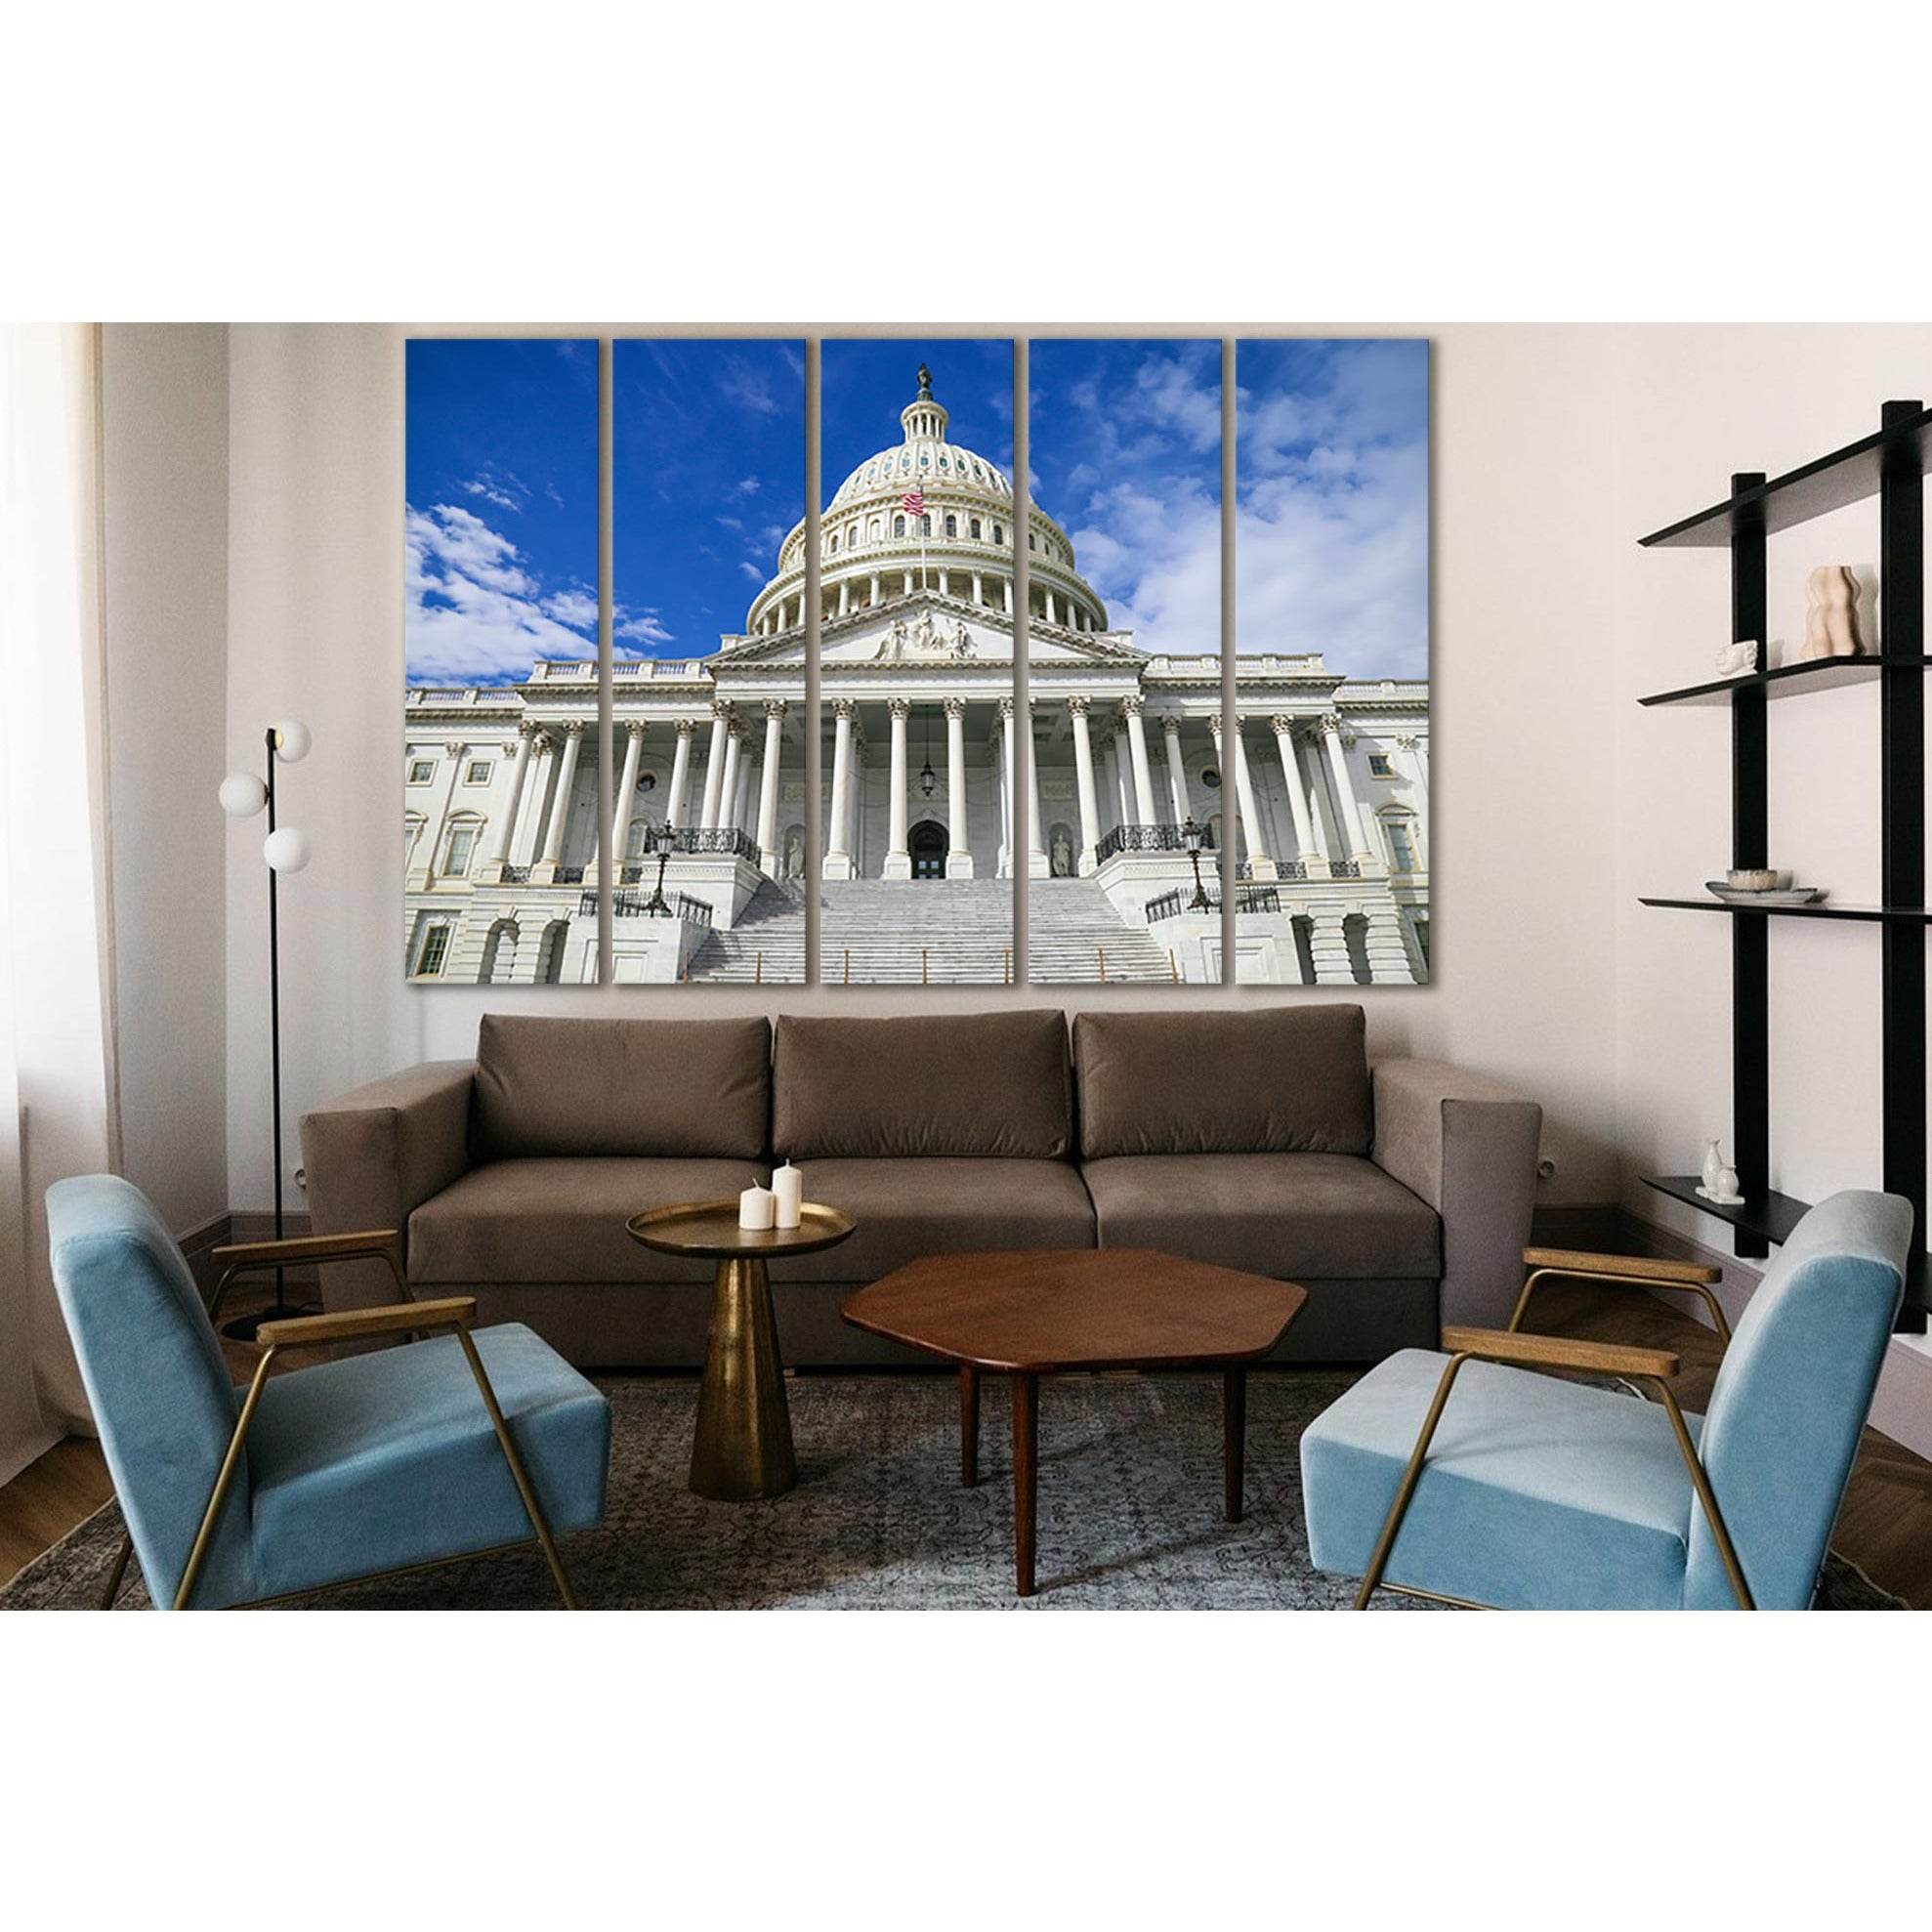 Capitol Building In Washington №SL1405 Ready to Hang Canvas Print